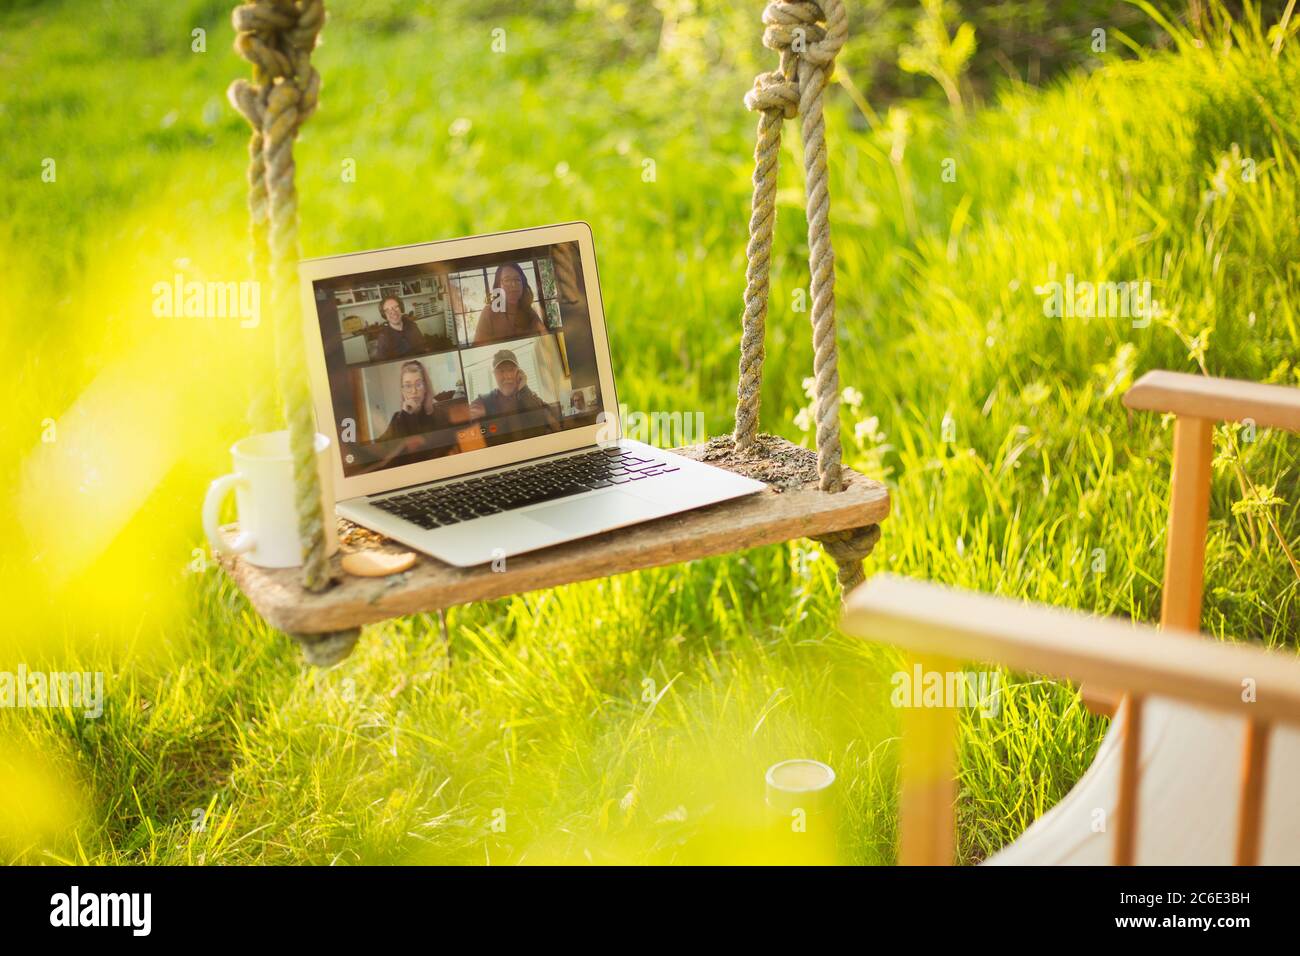 Colleagues video chatting on laptop screen on rustic swing in garden Stock Photo